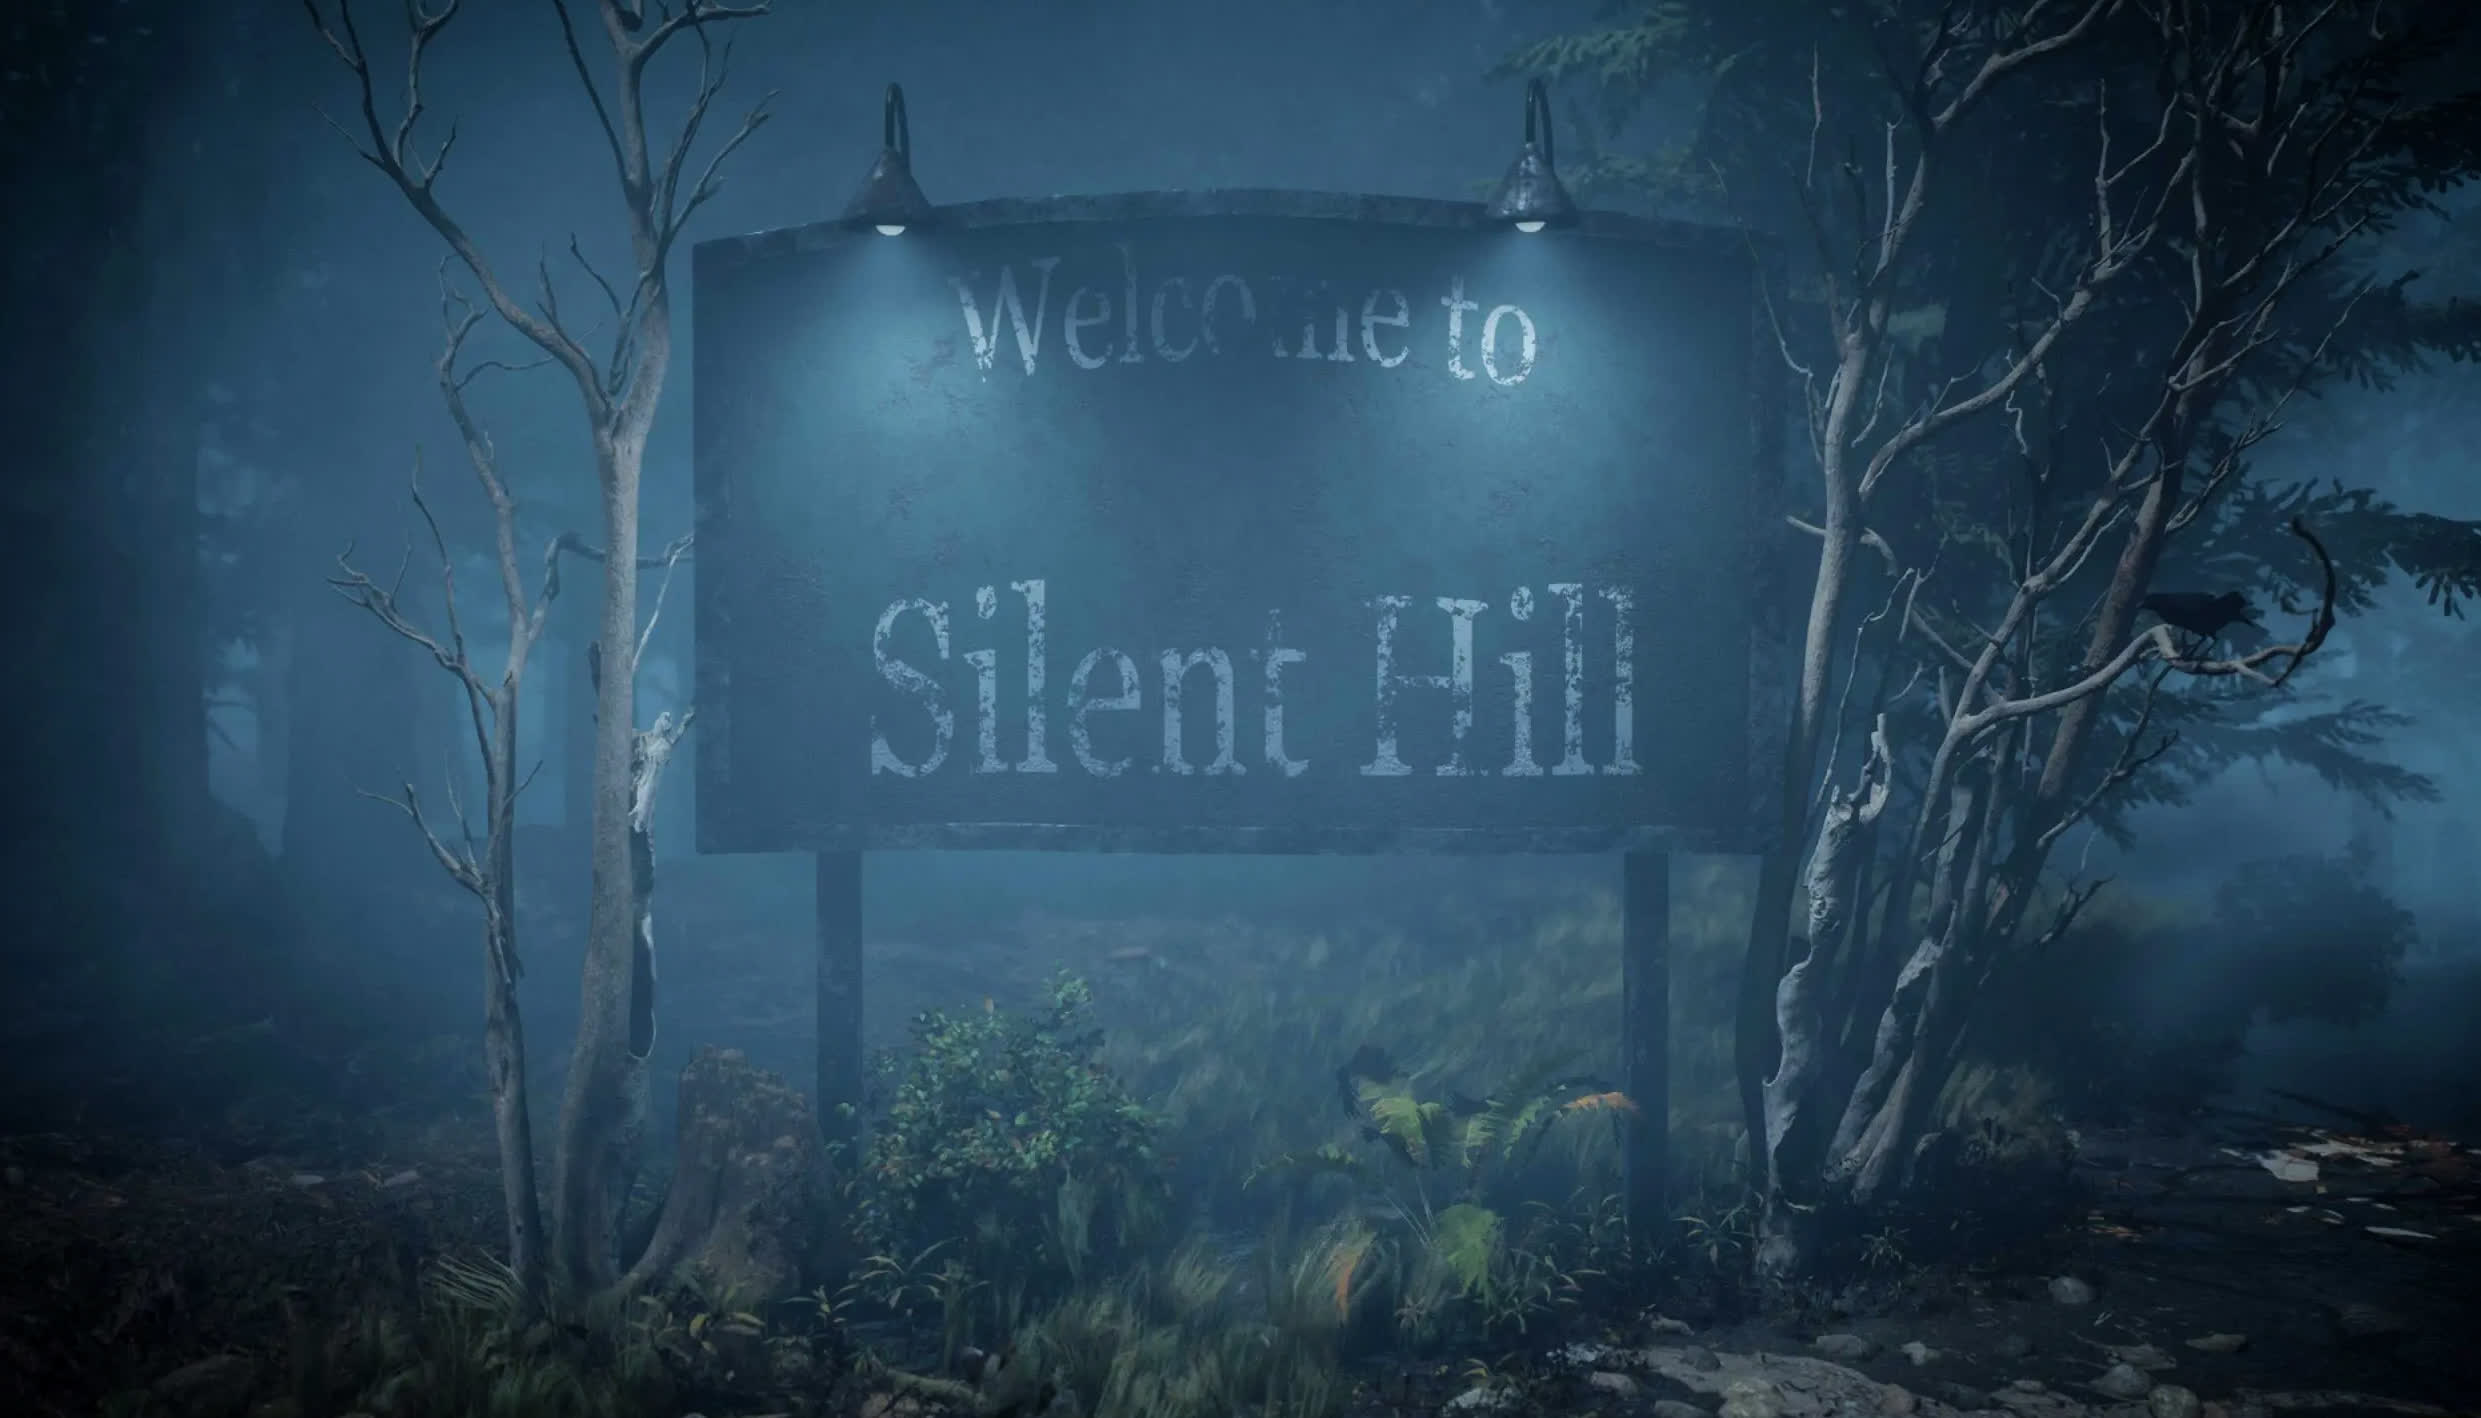 Konami will share what's next for Silent Hill on October 19